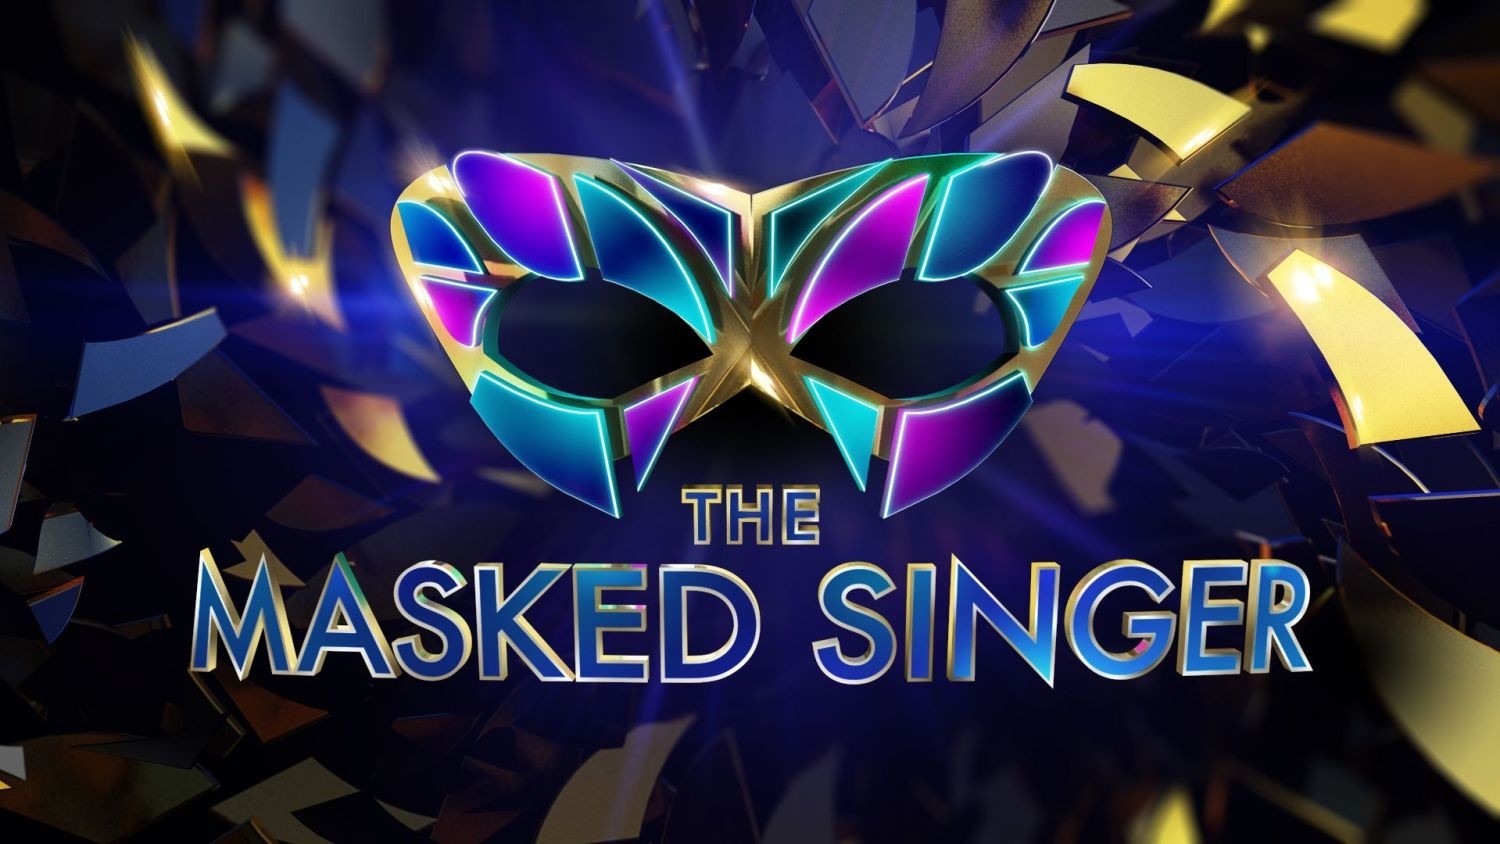 The logo of The Masked Singer against a shiny geometric background